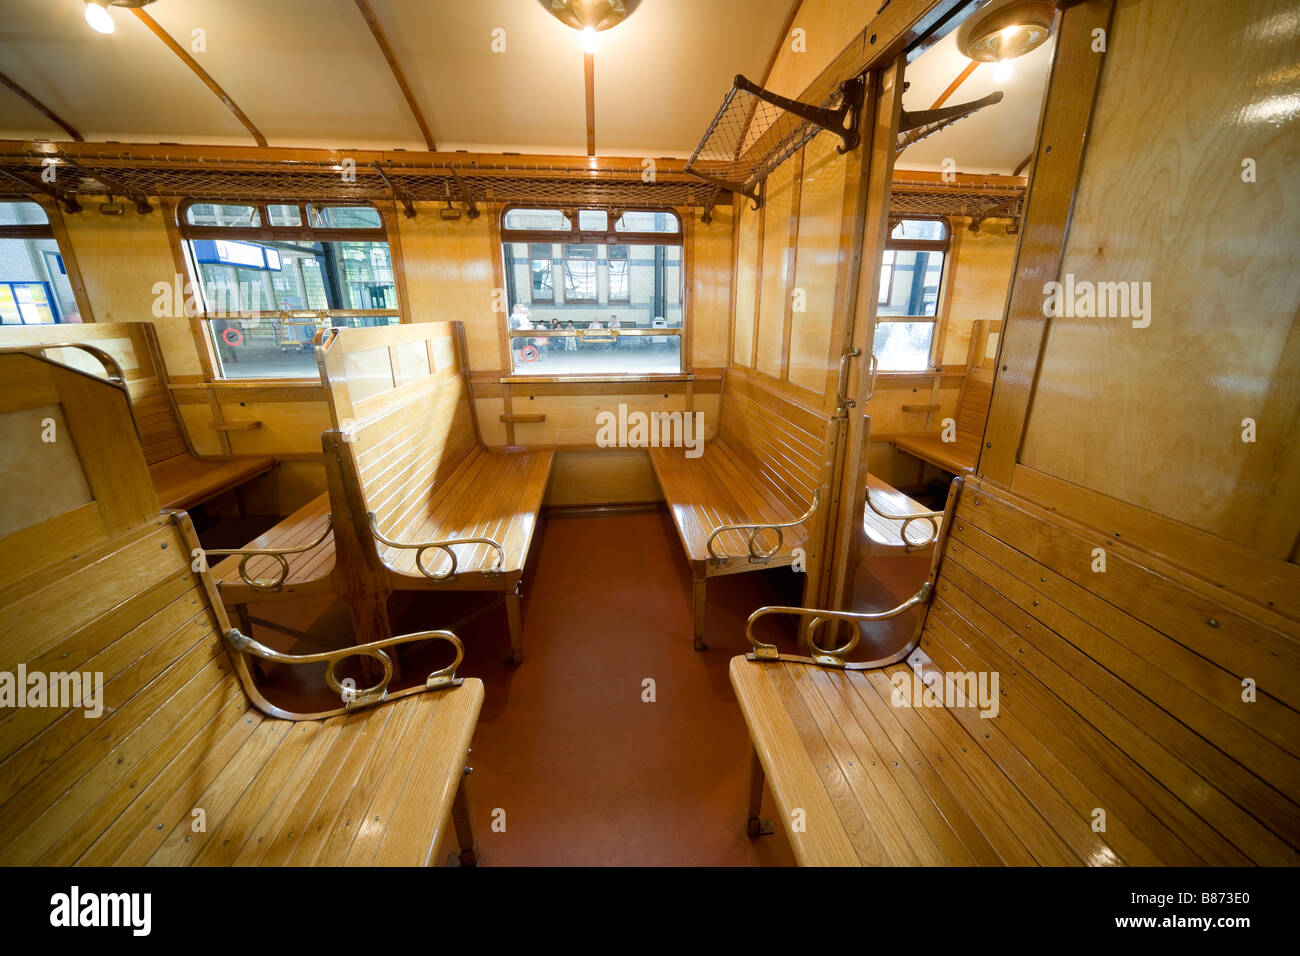 Interior of a Dutch International early 20th century railway carriage, made 1923 in Haarlem by Beynes. 3rd class wooden section. Stock Photo